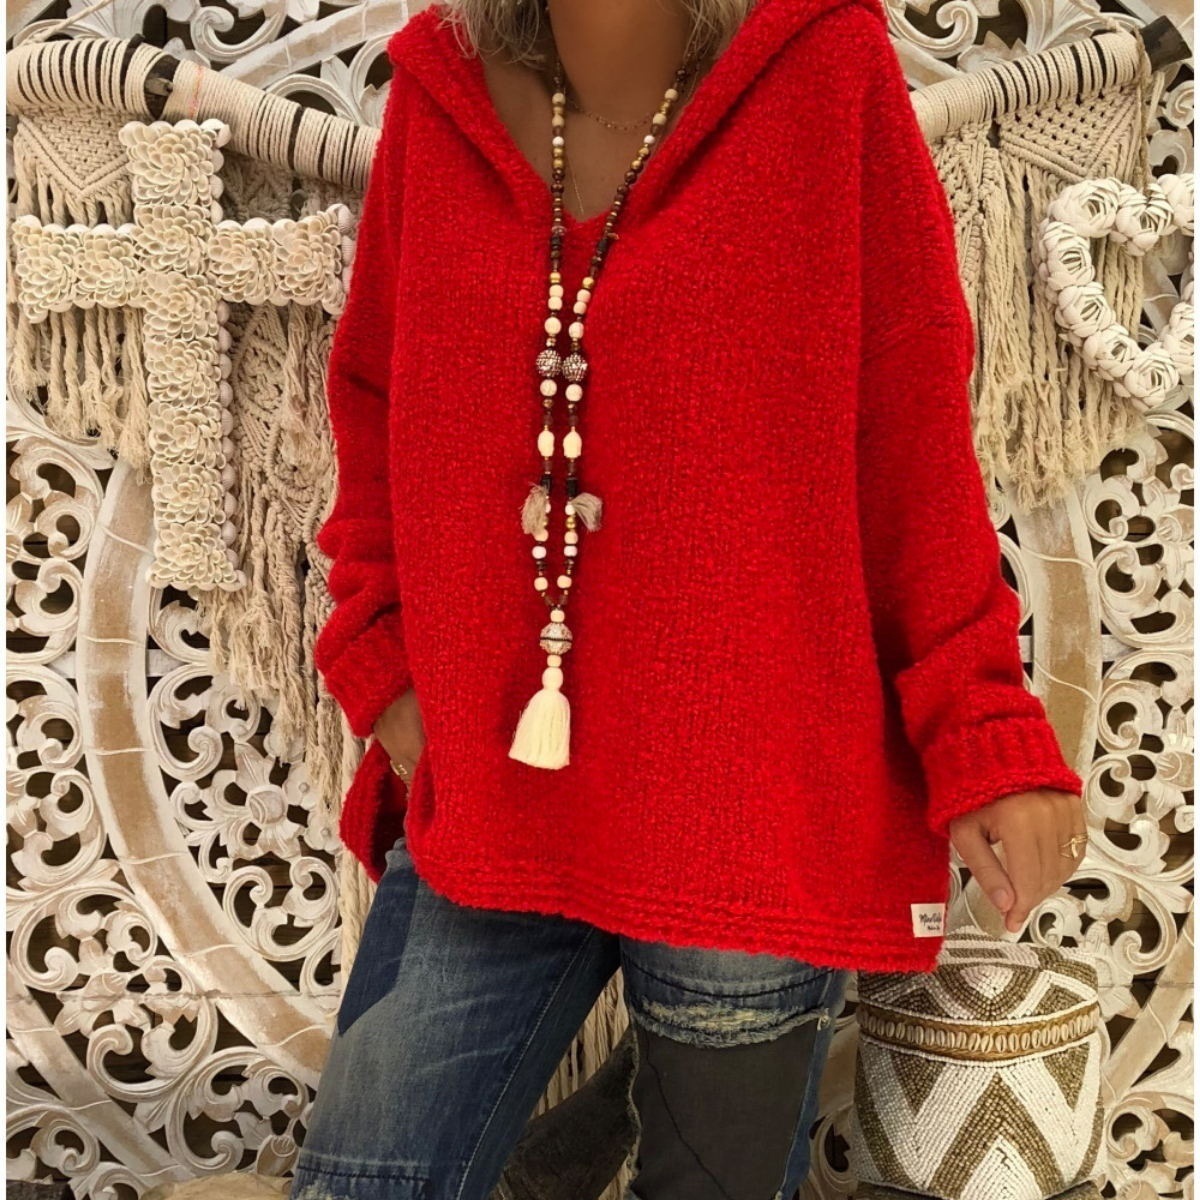  Women Hooded Sweater Autumn Winter Long Sleeve Loose Causal Knitted Jumper Pullover Tops red